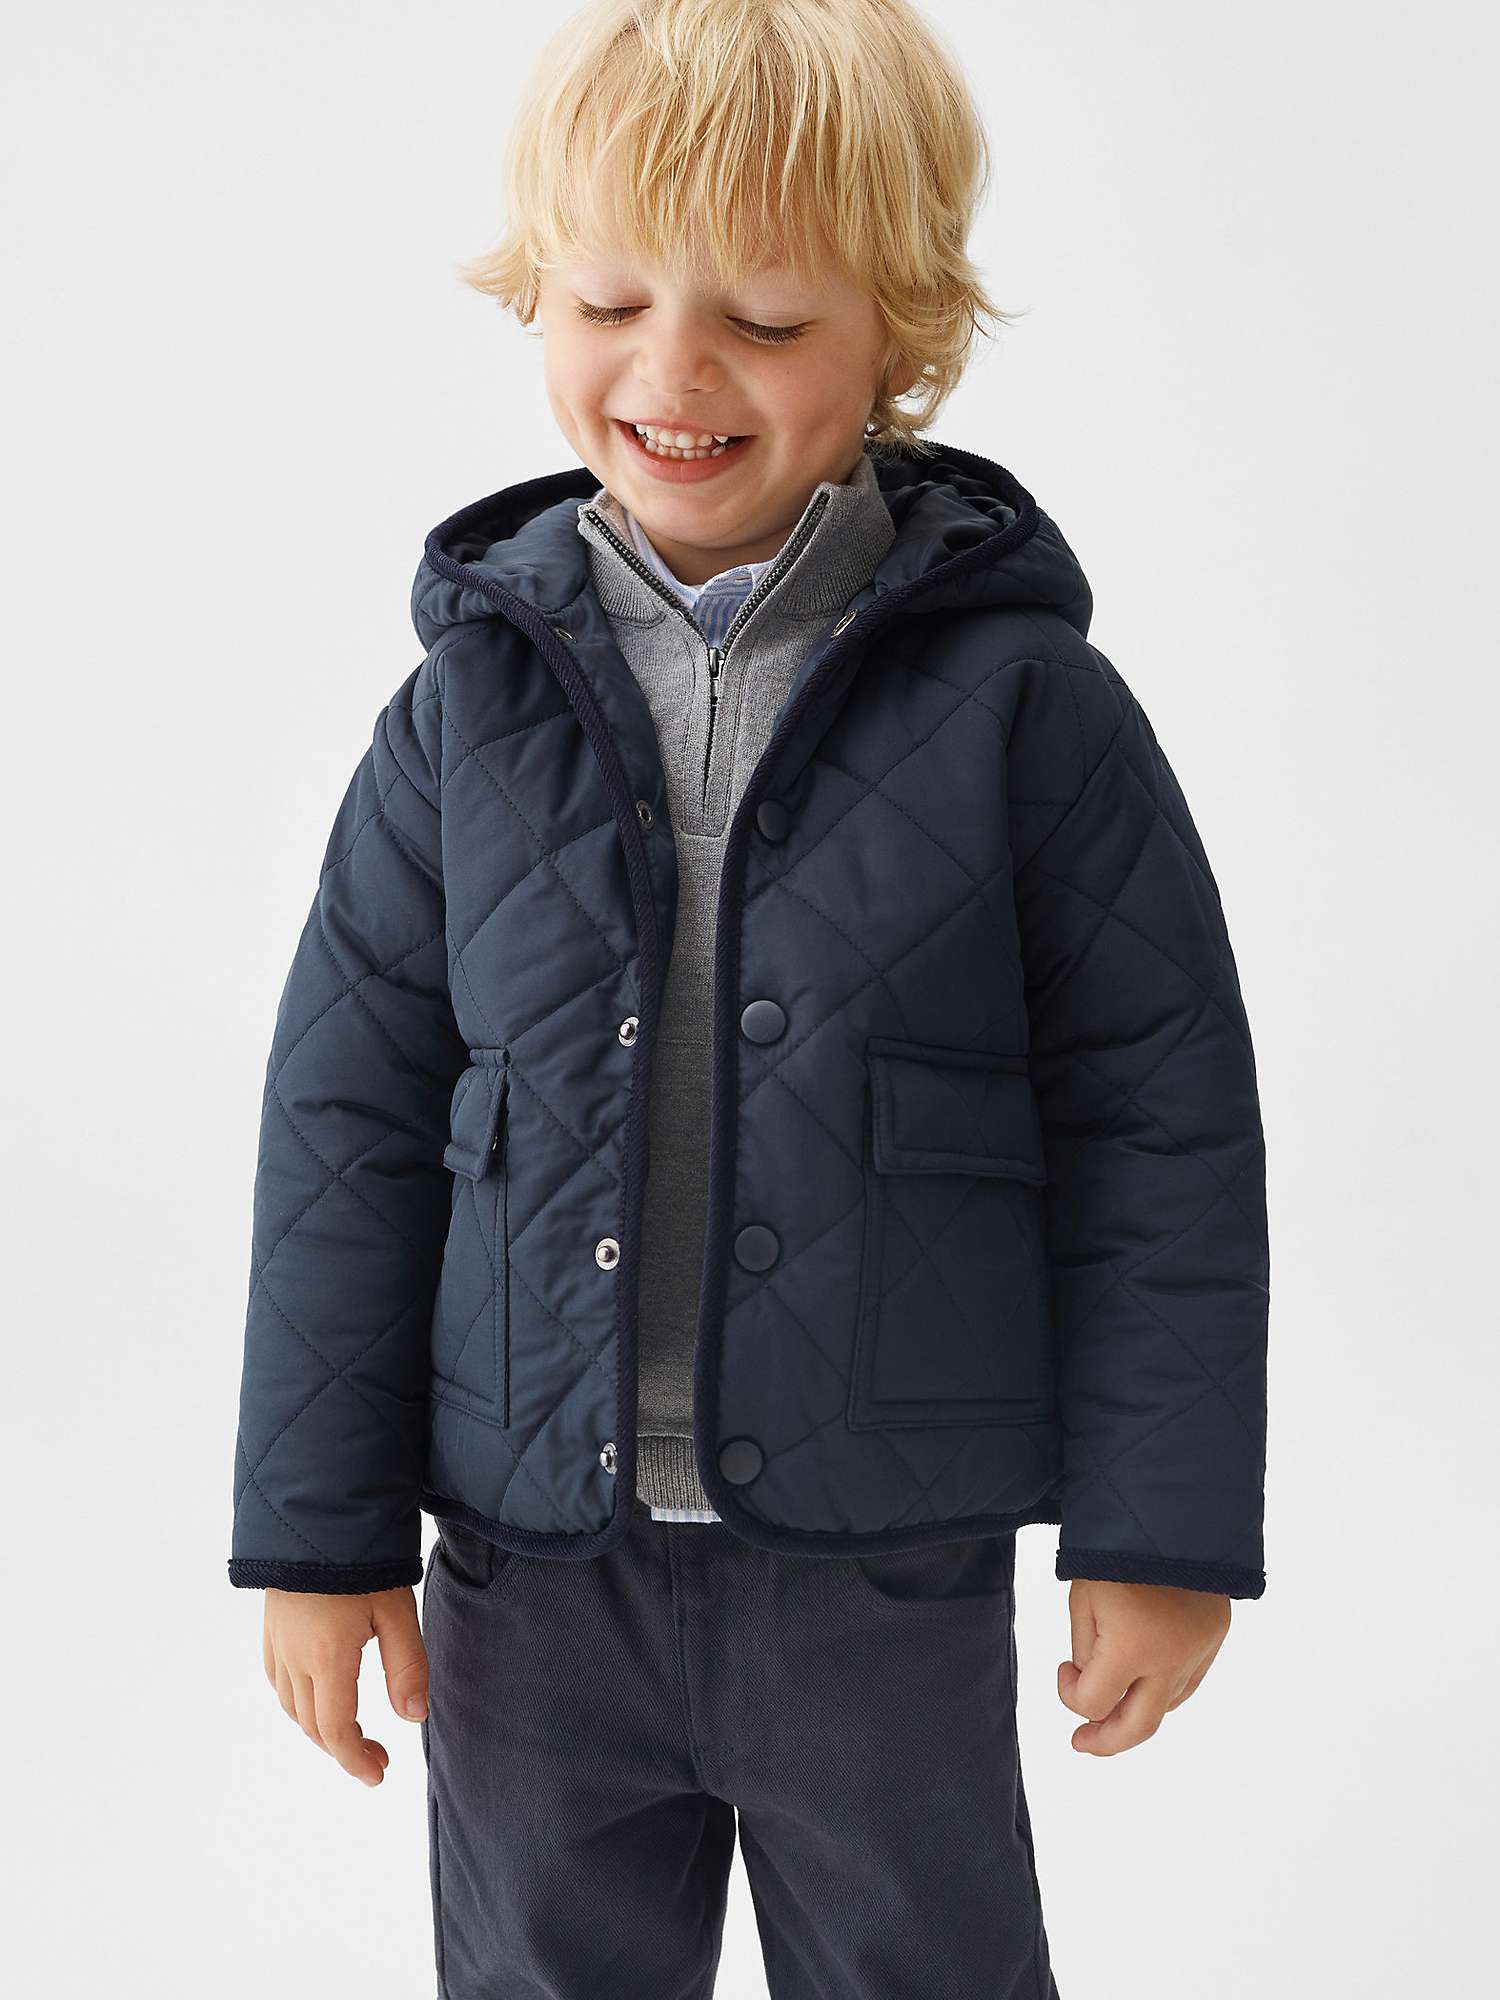 Buy Mango Baby Husky Hooded Quilted Jacket, Navy Online at johnlewis.com